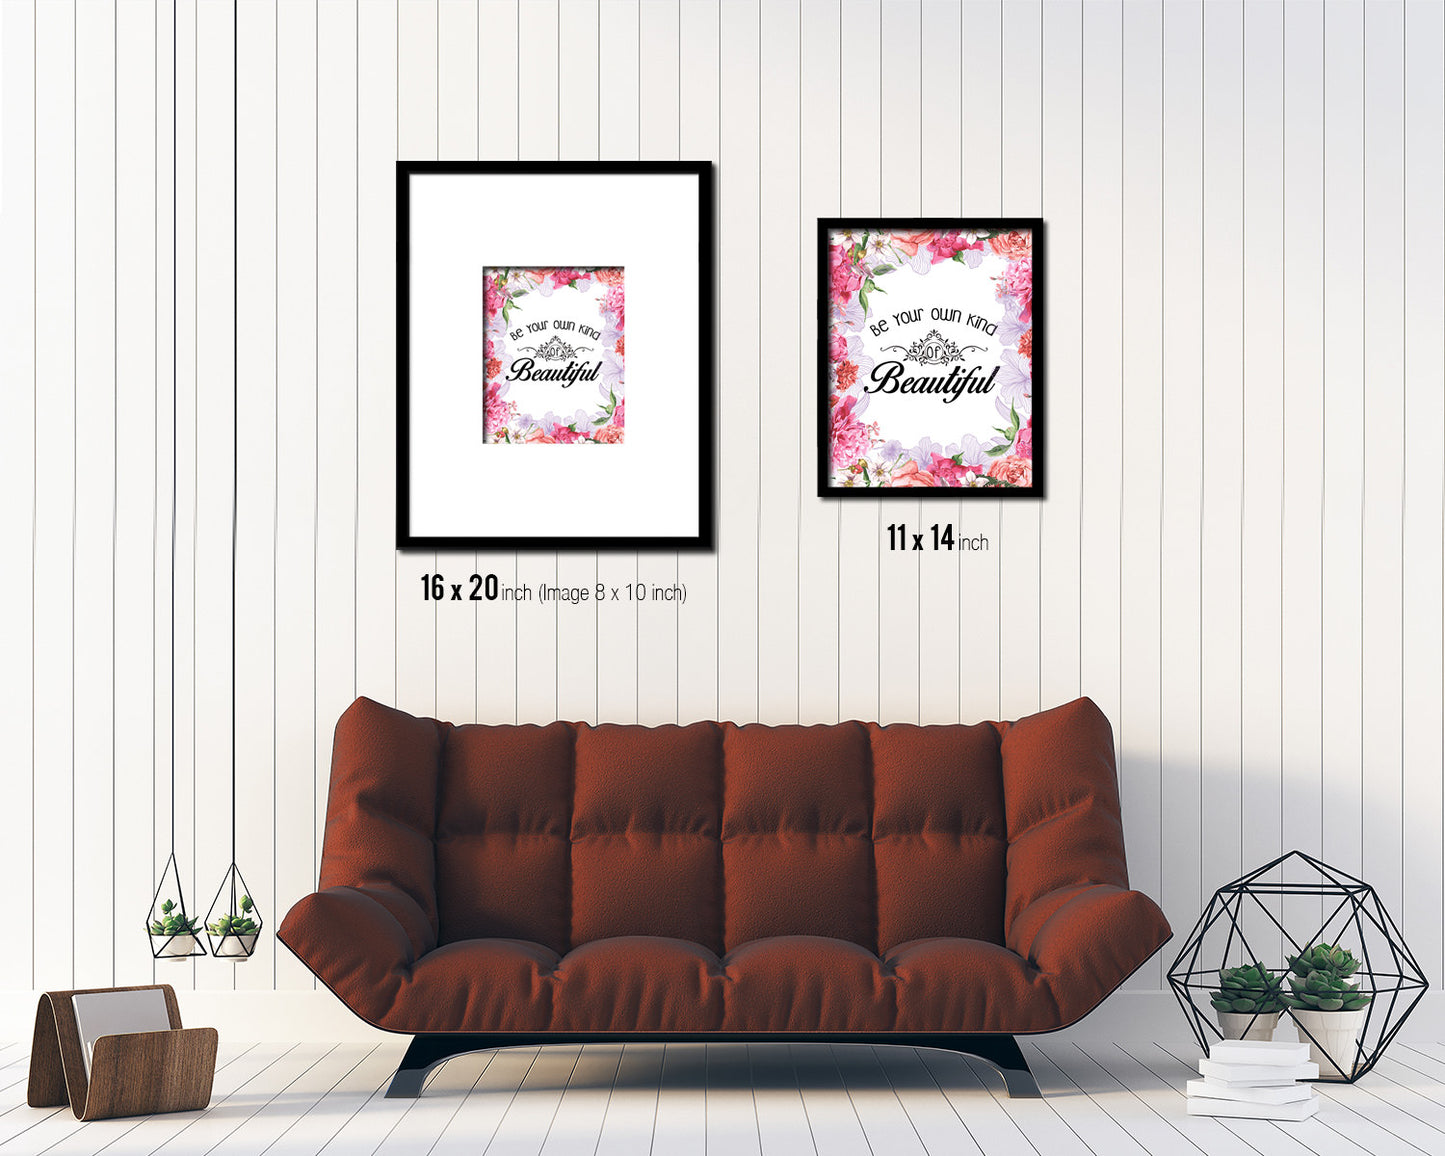 Be your own kind of beautiful Quote Framed Print Home Decor Wall Art Gifts